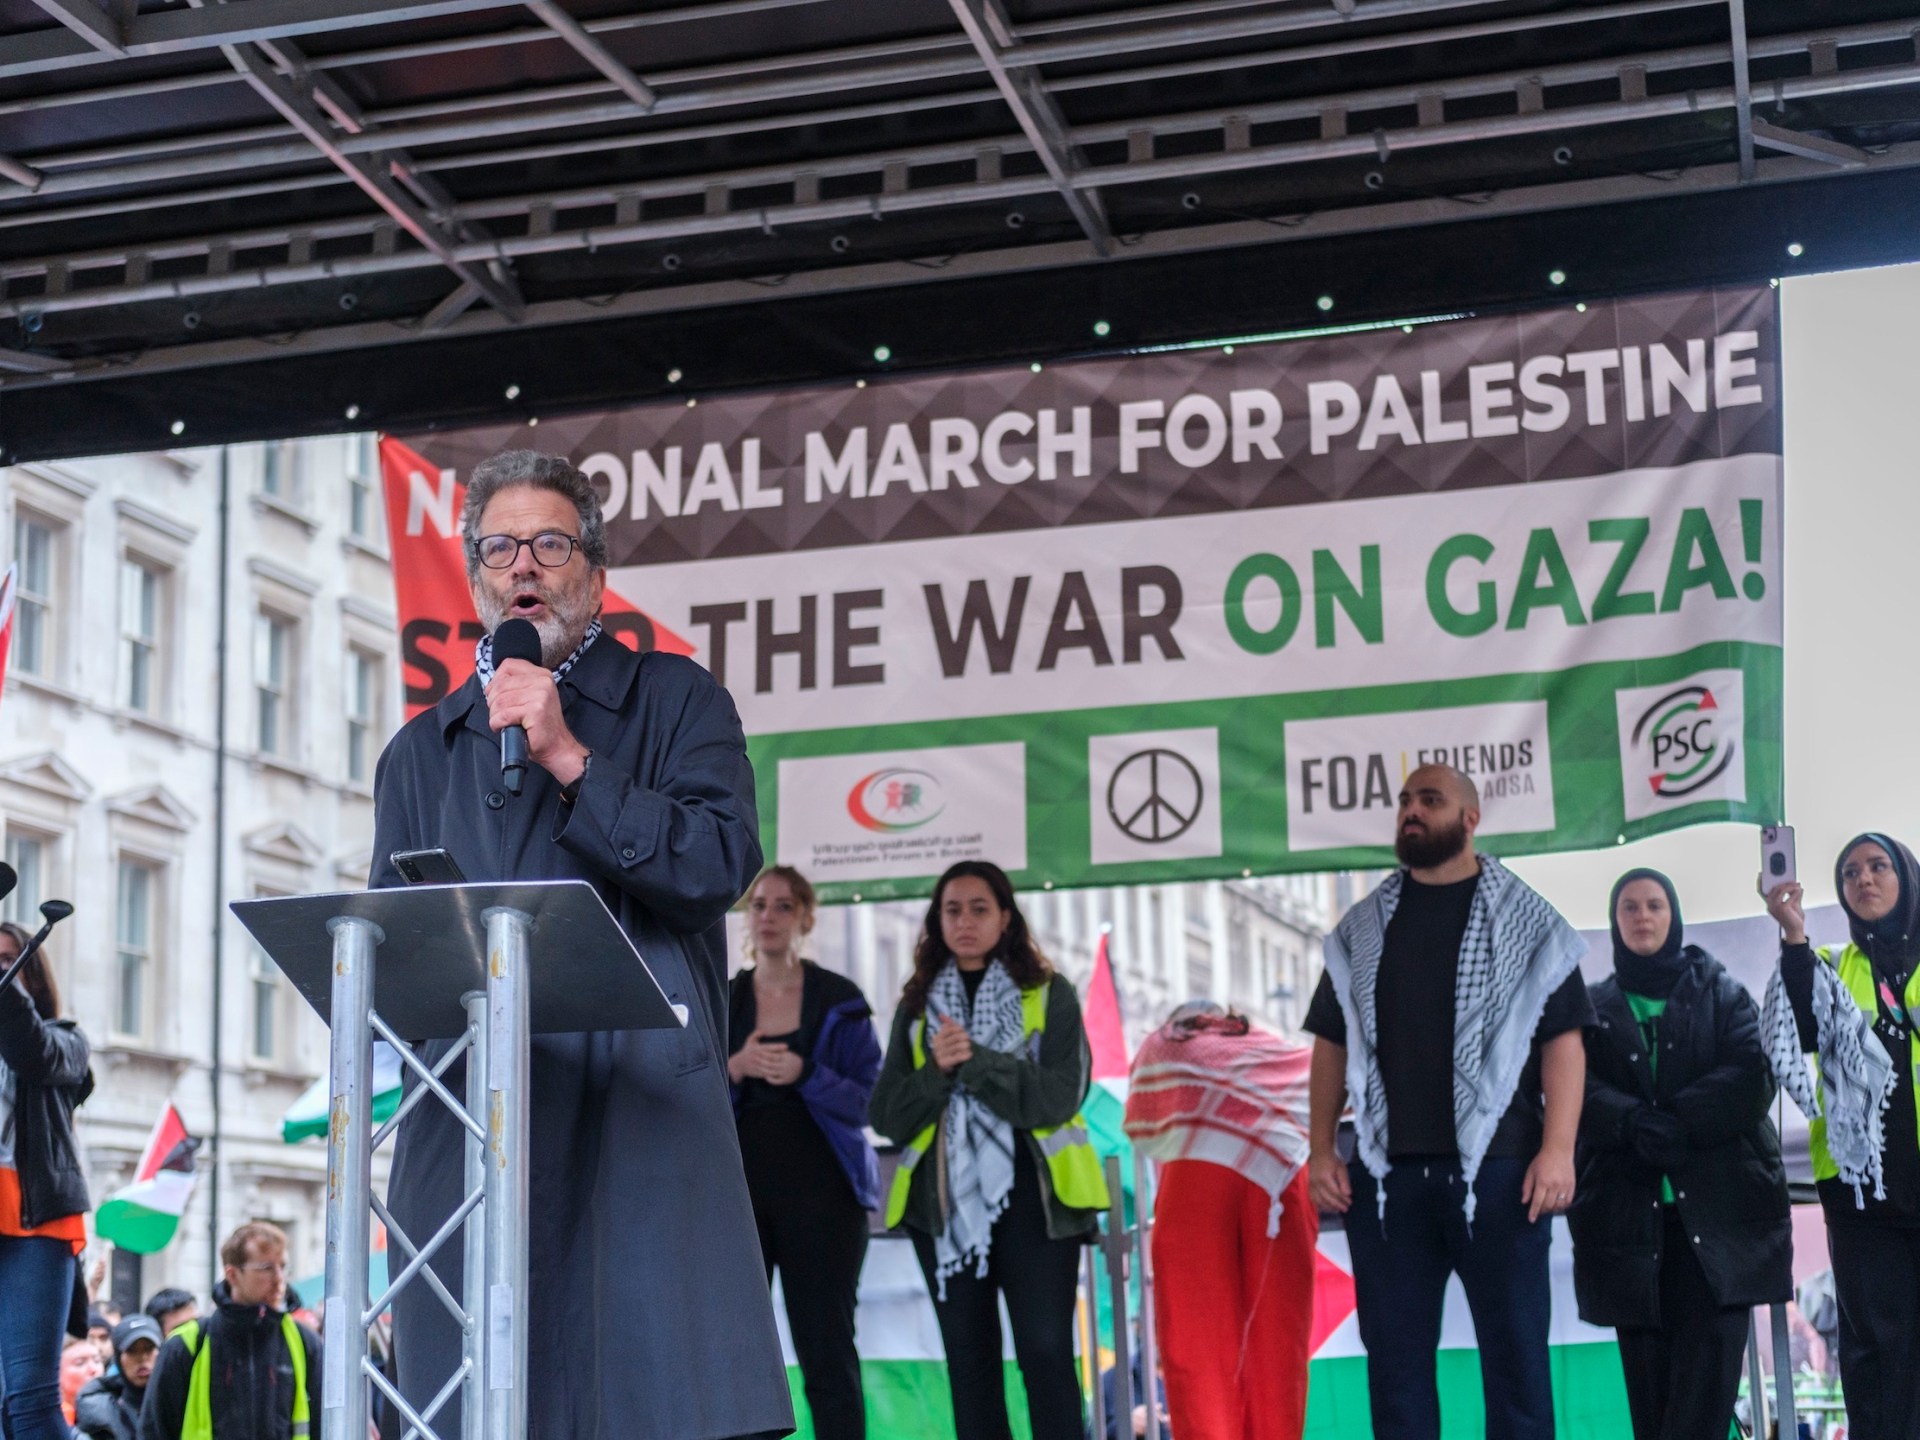 ‘Solidarity with Palestine’: British protesters defy threats to hit streets | Israel-Palestine conflict News